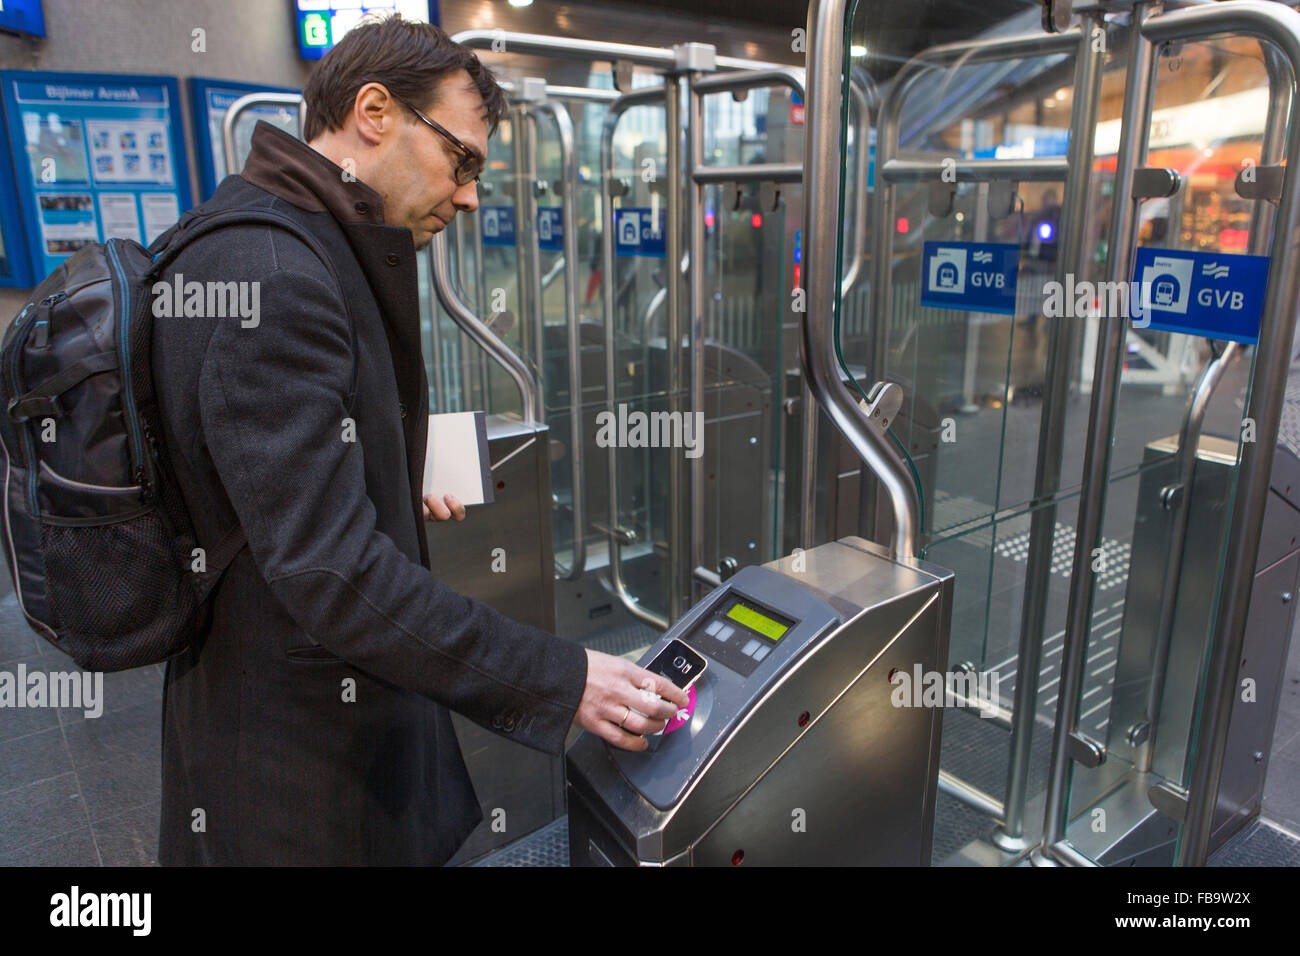 All Dutch transport companies started in collaboration with telephone companies (Vodafone and KNP) an experiment in which commuters can  check in and out by mobile phone on public transport. Stock Photo